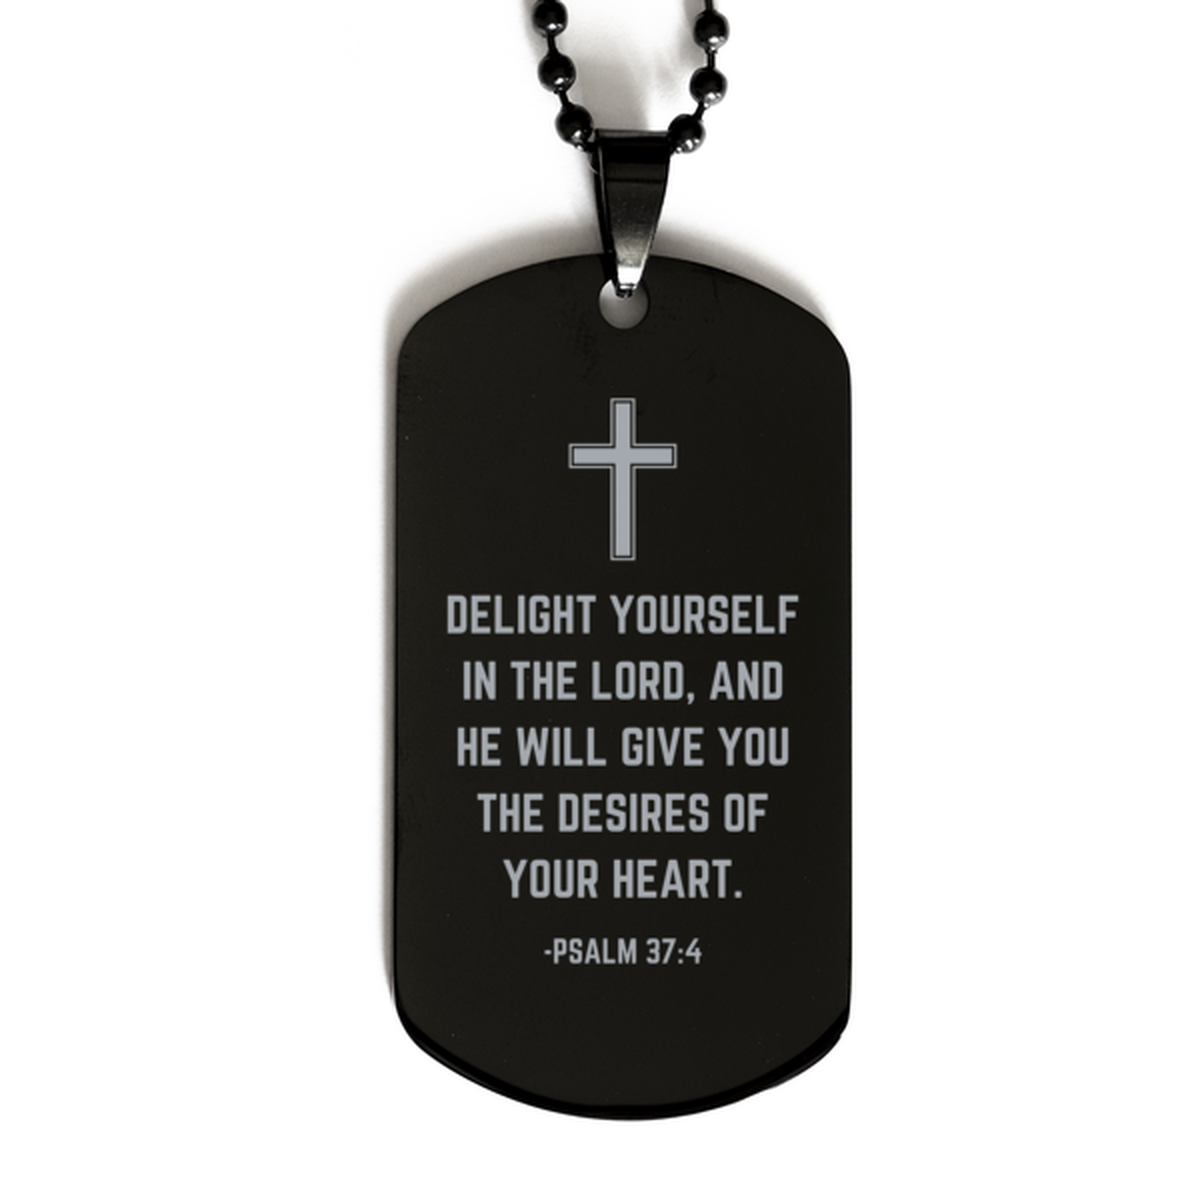 Baptism Gifts For Teenage Boys Girls, Christian Bible Verse Black Dog Tag, Delight yourself in the Lord, Confirmation Gifts, Bible Verse Necklace for Son, Godson, Grandson, Nephew